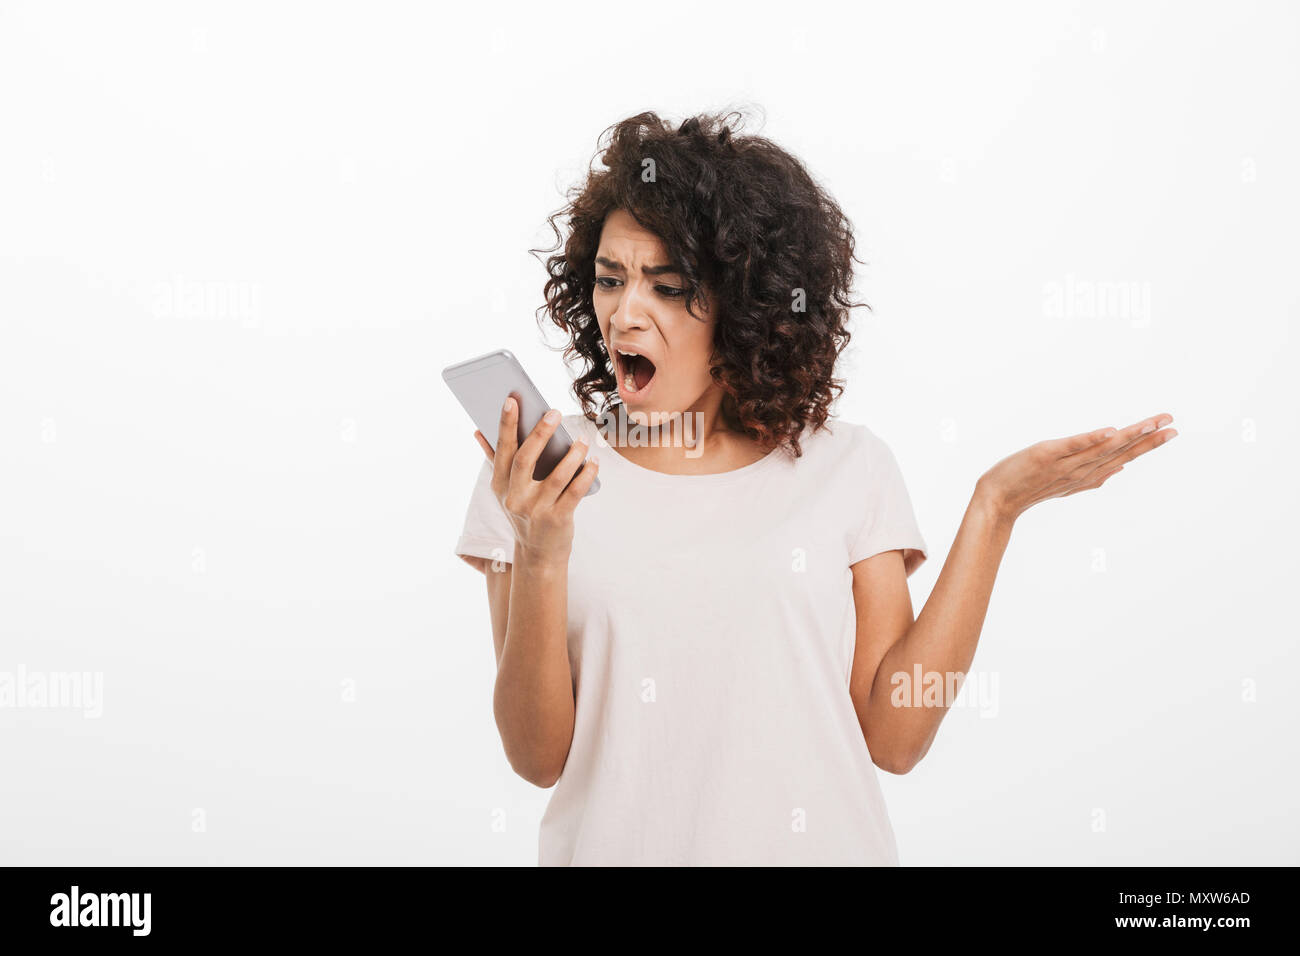 Portrait of american woman with afro hairstyle wearing t-shirt shouting into mobile phone being annoyed and angry isolated over white background Stock Photo